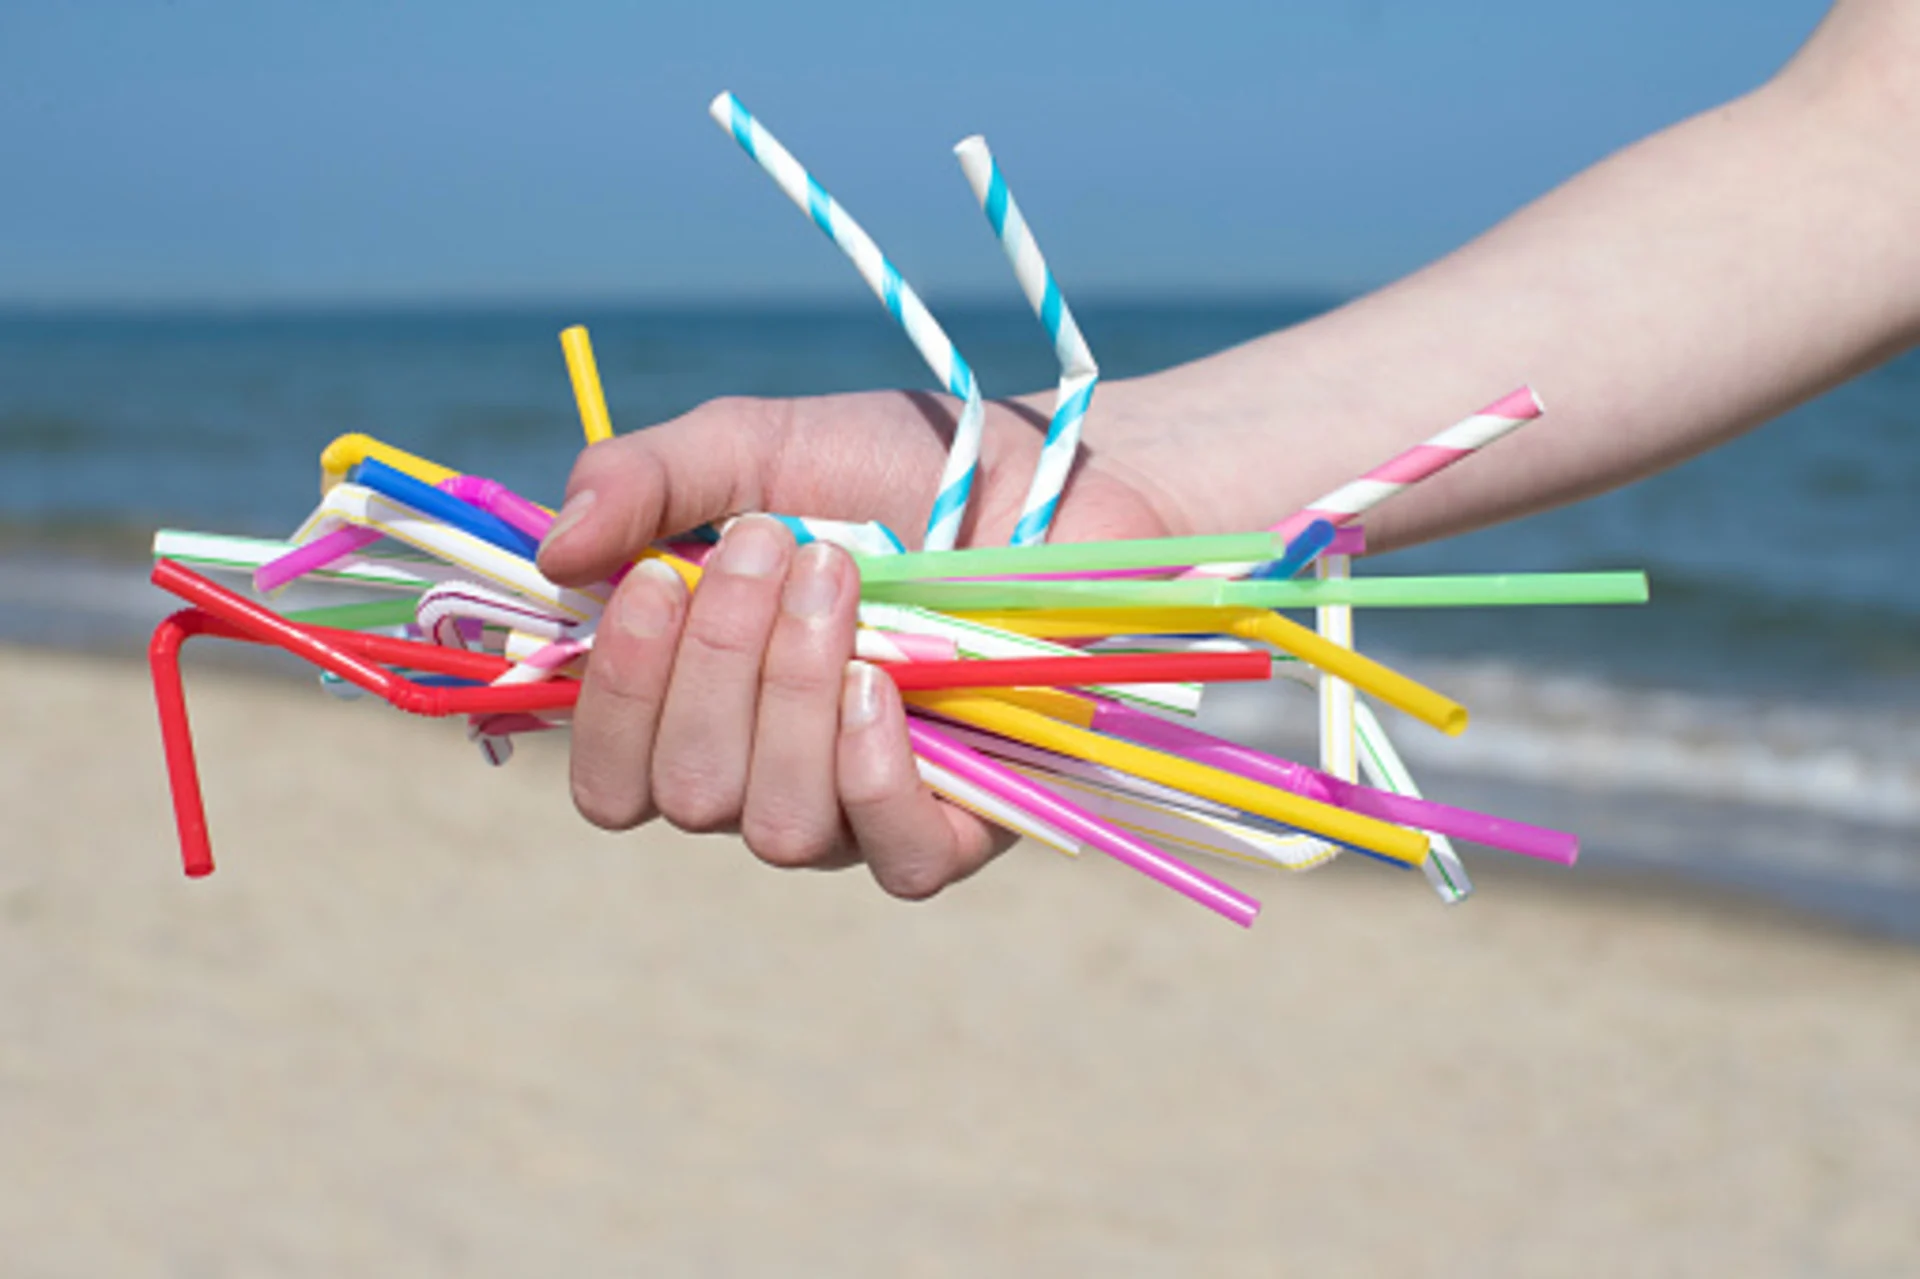 For the first time in over a decade, plastic straws are no longer a top concern on coastline litter list. Details, here